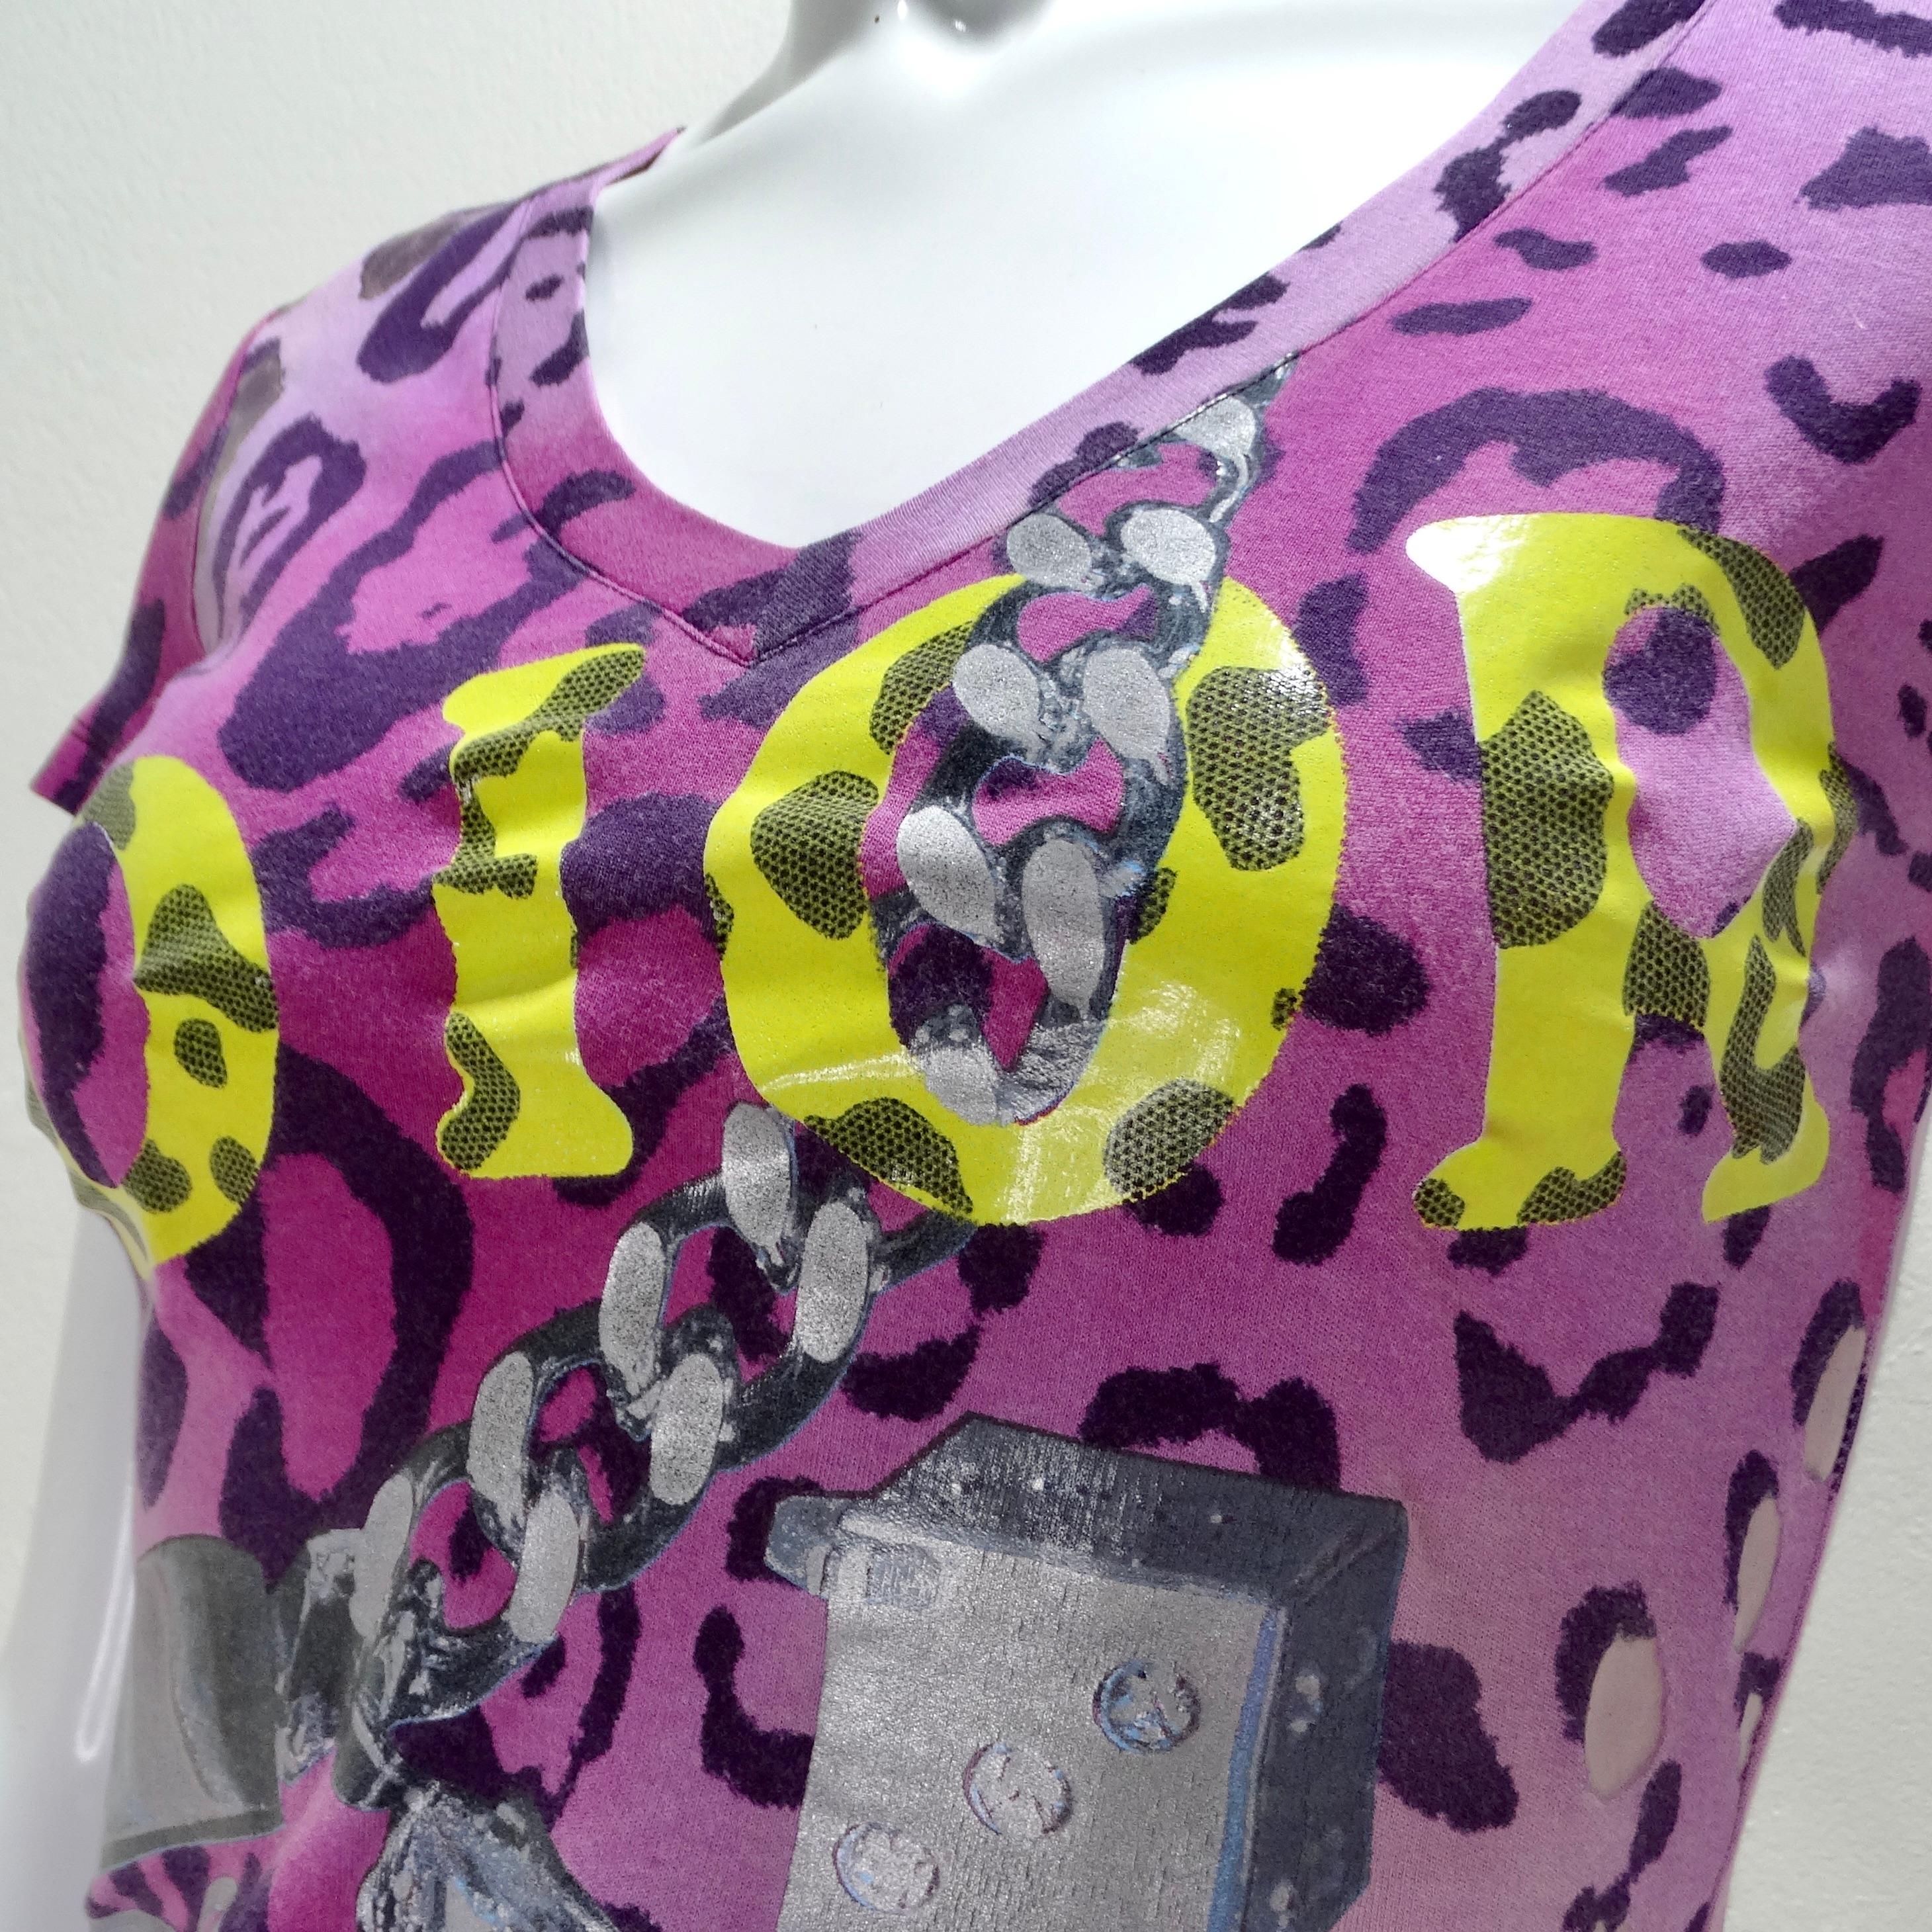 Make a bold statement with the Christian Dior 2004 Y2K Dice Leopard Print T-Shirt, a vibrant homage to the iconic John Galliano era for Christian Dior.

This eye-catching V-neck t-shirt features a striking purple leopard print that exudes boldness